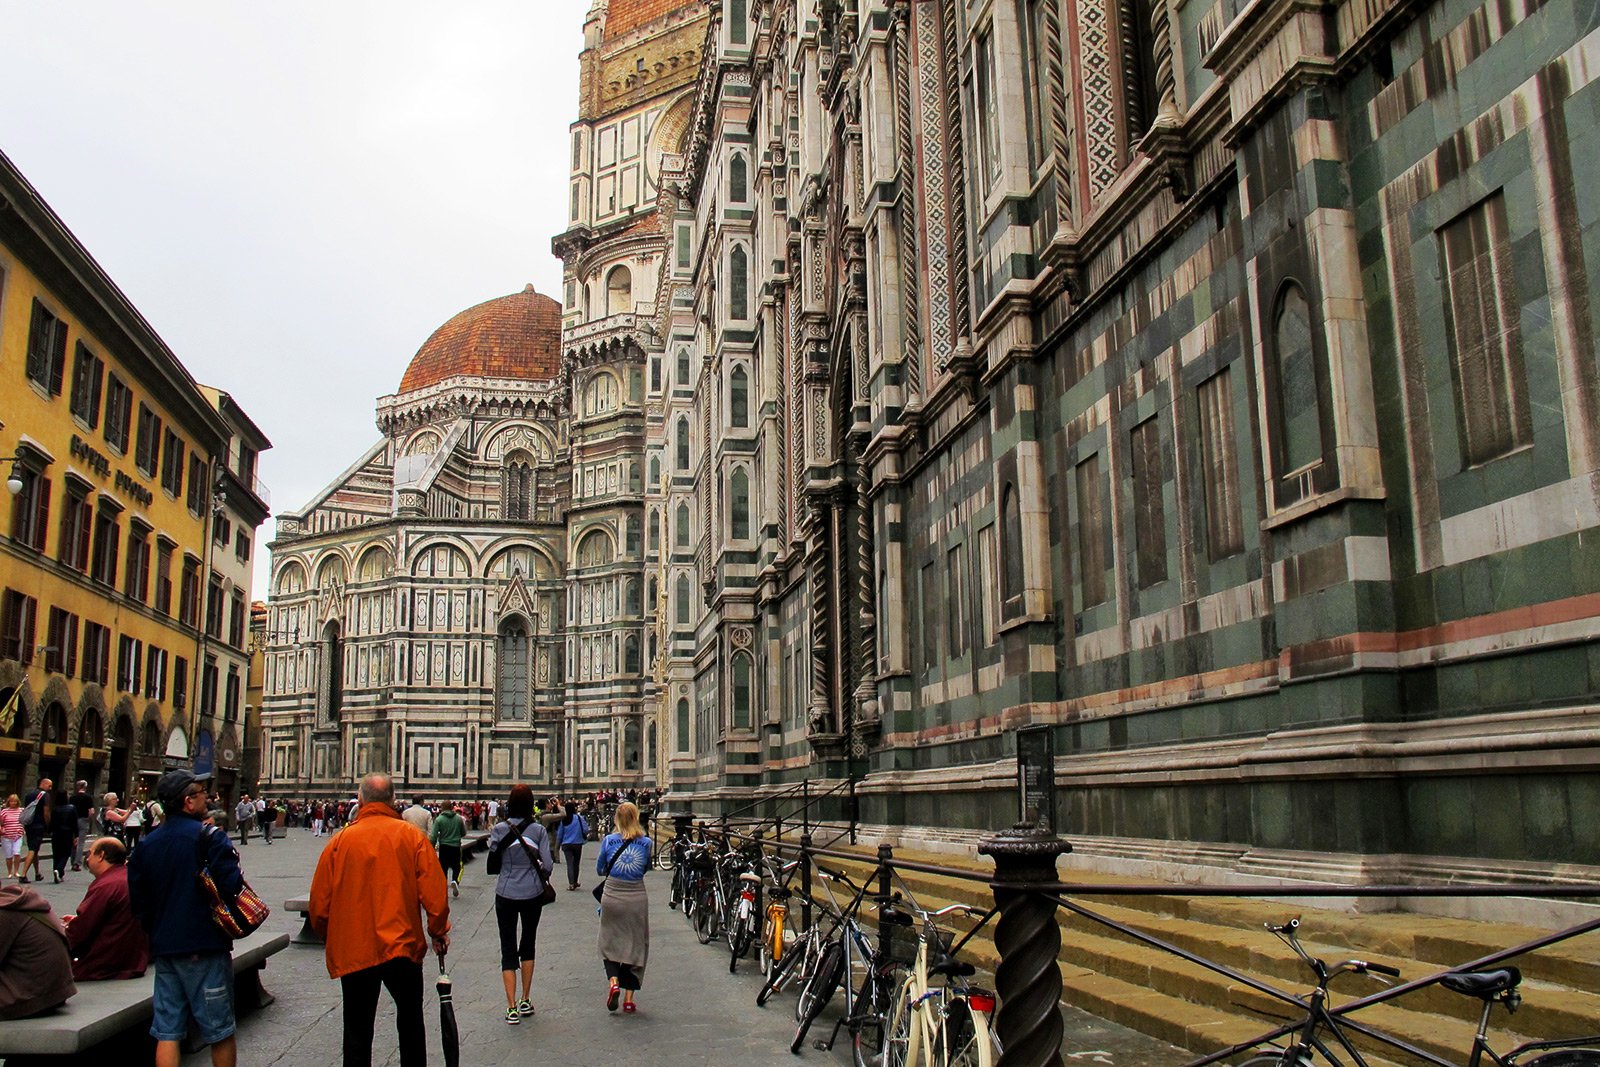 How to walk around Piazza Duomo in Florence